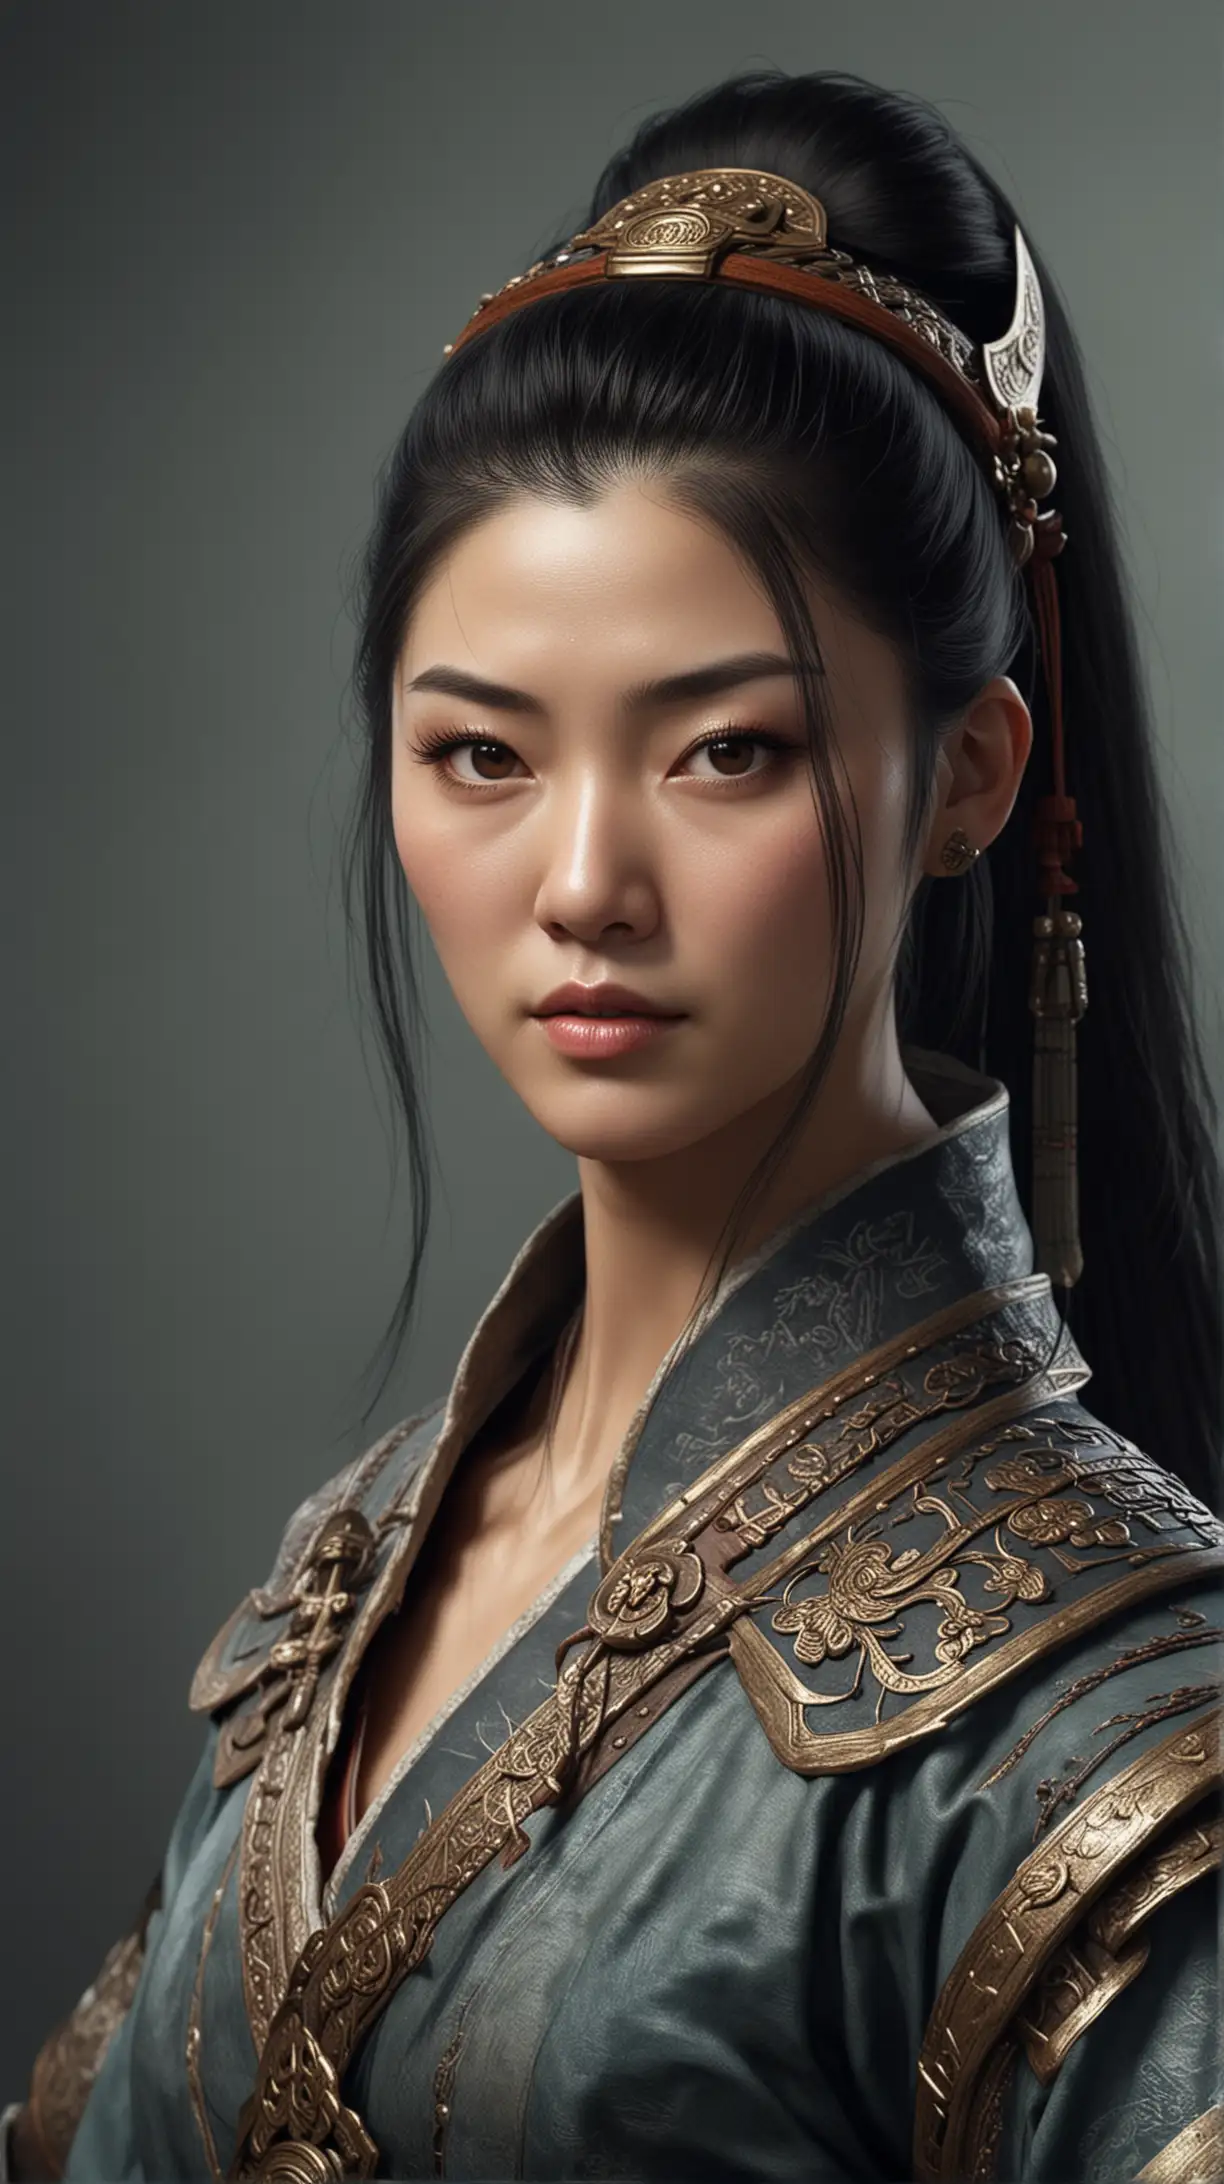 Hyper Realistic Portrait of an Ancient Chinese Woman Warrior